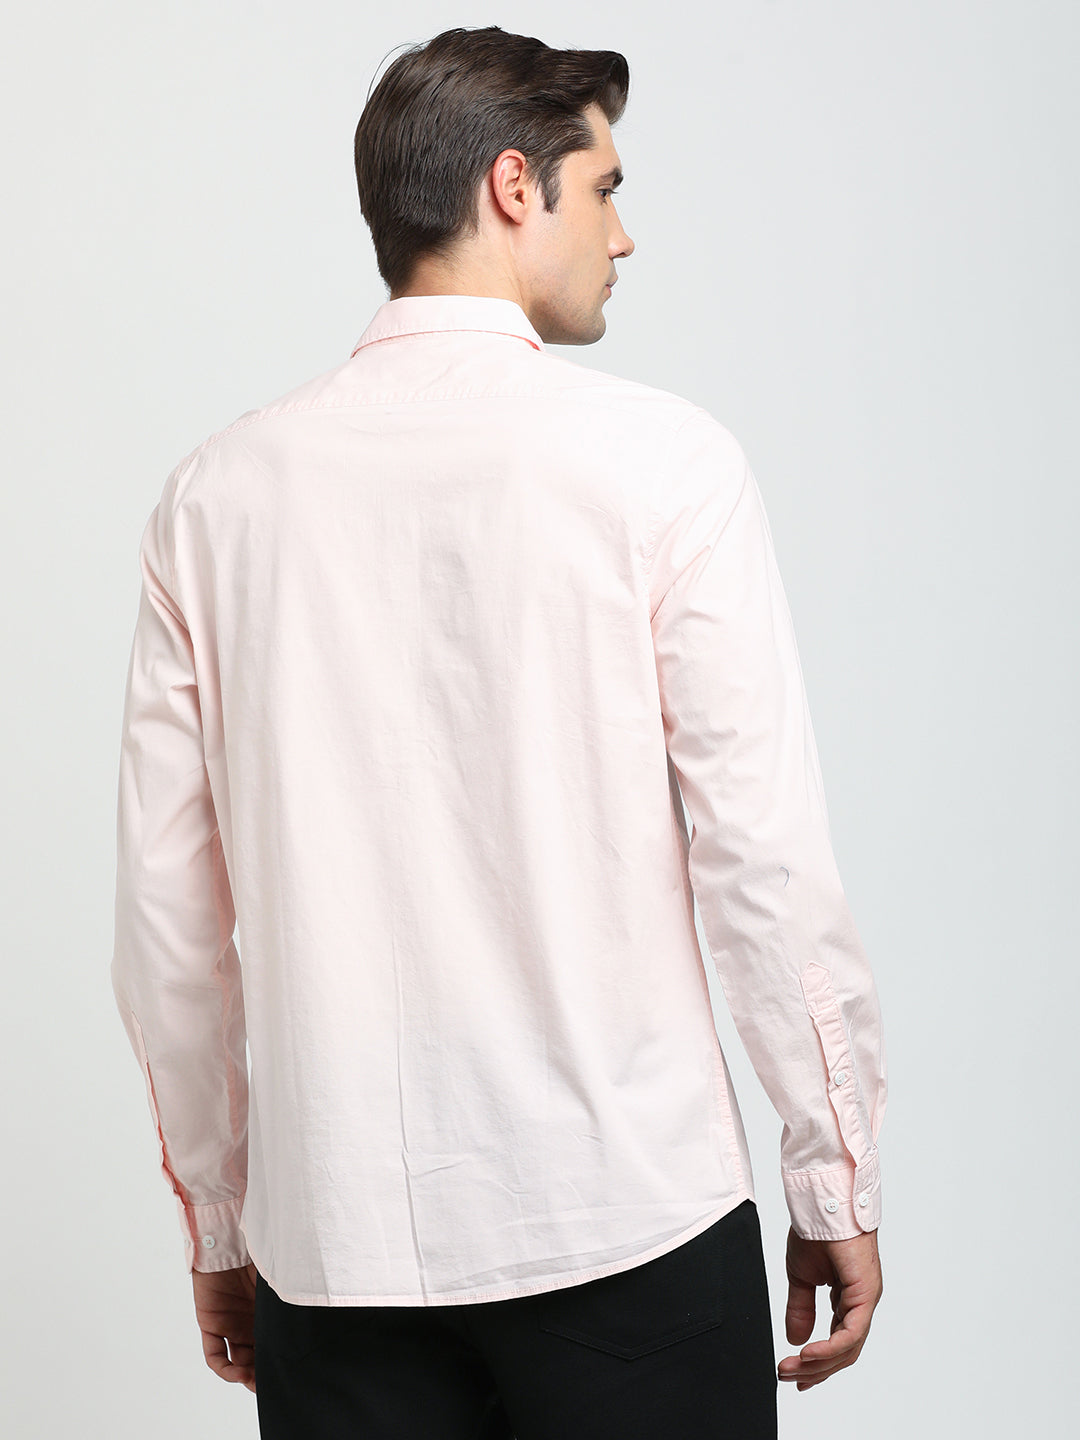 Cotton Stretch Pink Plain Slim Fit Full Sleeve Casual Shirt